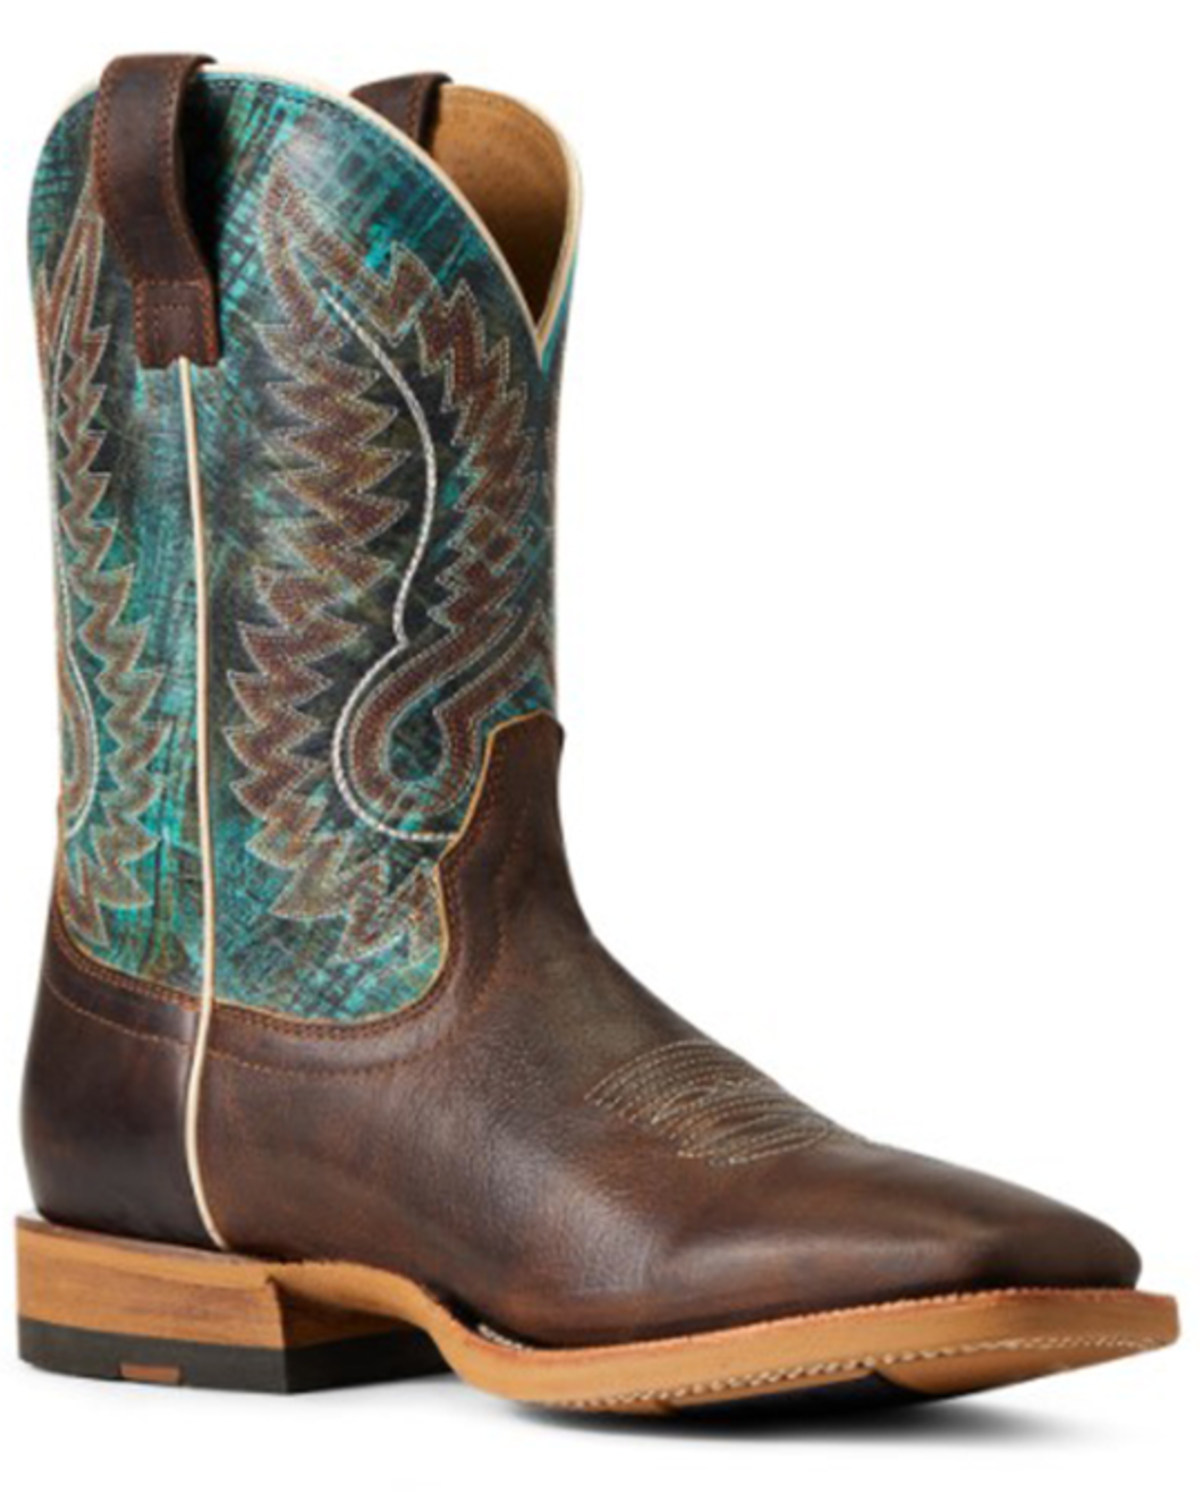 Ariat Men's Cow Camp Leather Western Performance Boot - Broad Square Toe